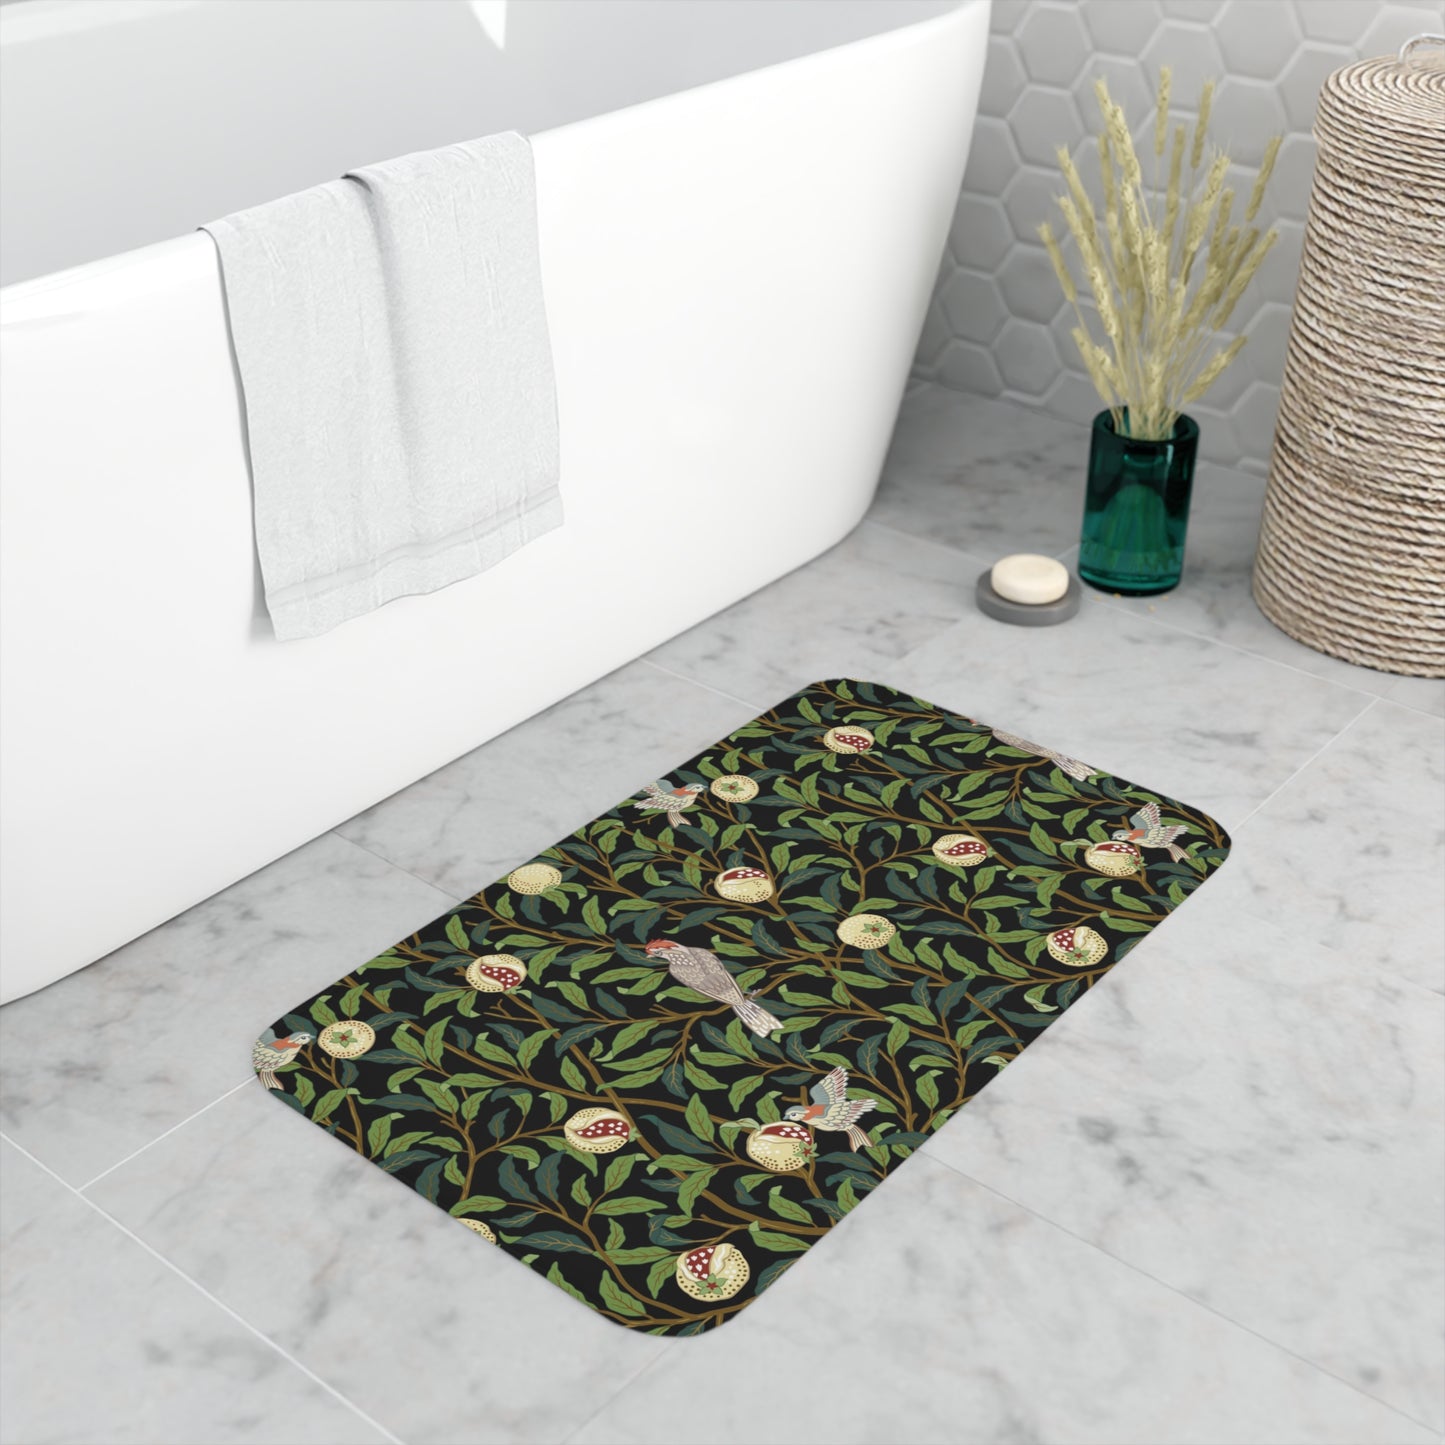 william-morris-co-memory-foam-bath-mat-bird-and-pomegranate-collection-onyx-7